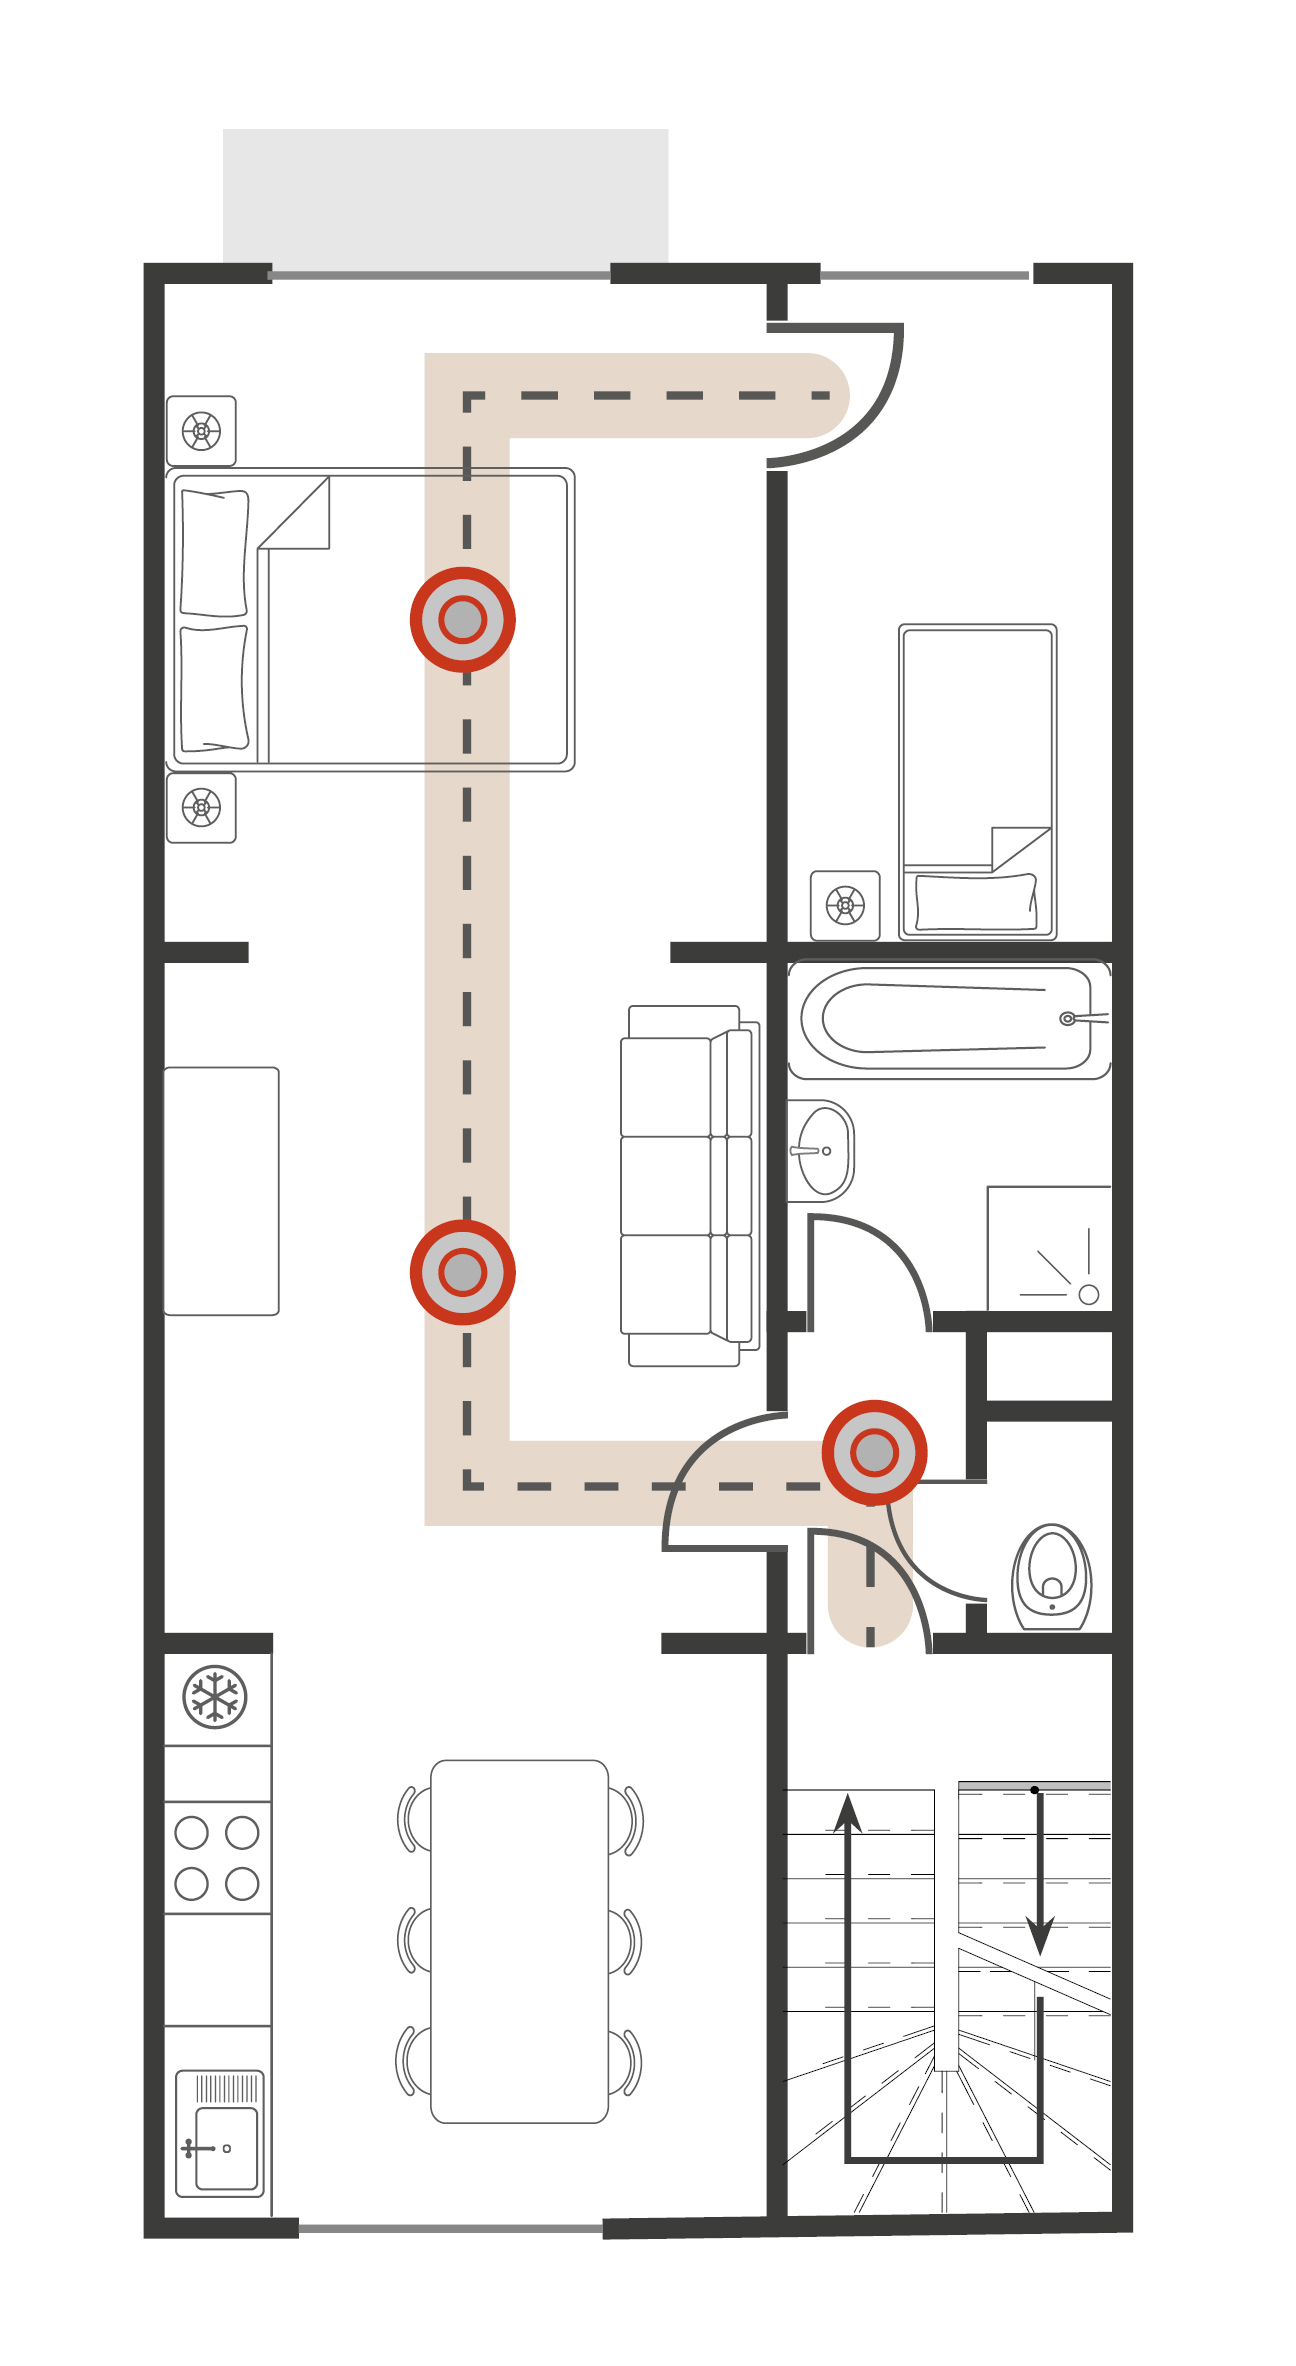 Plan appartement 2 chambres